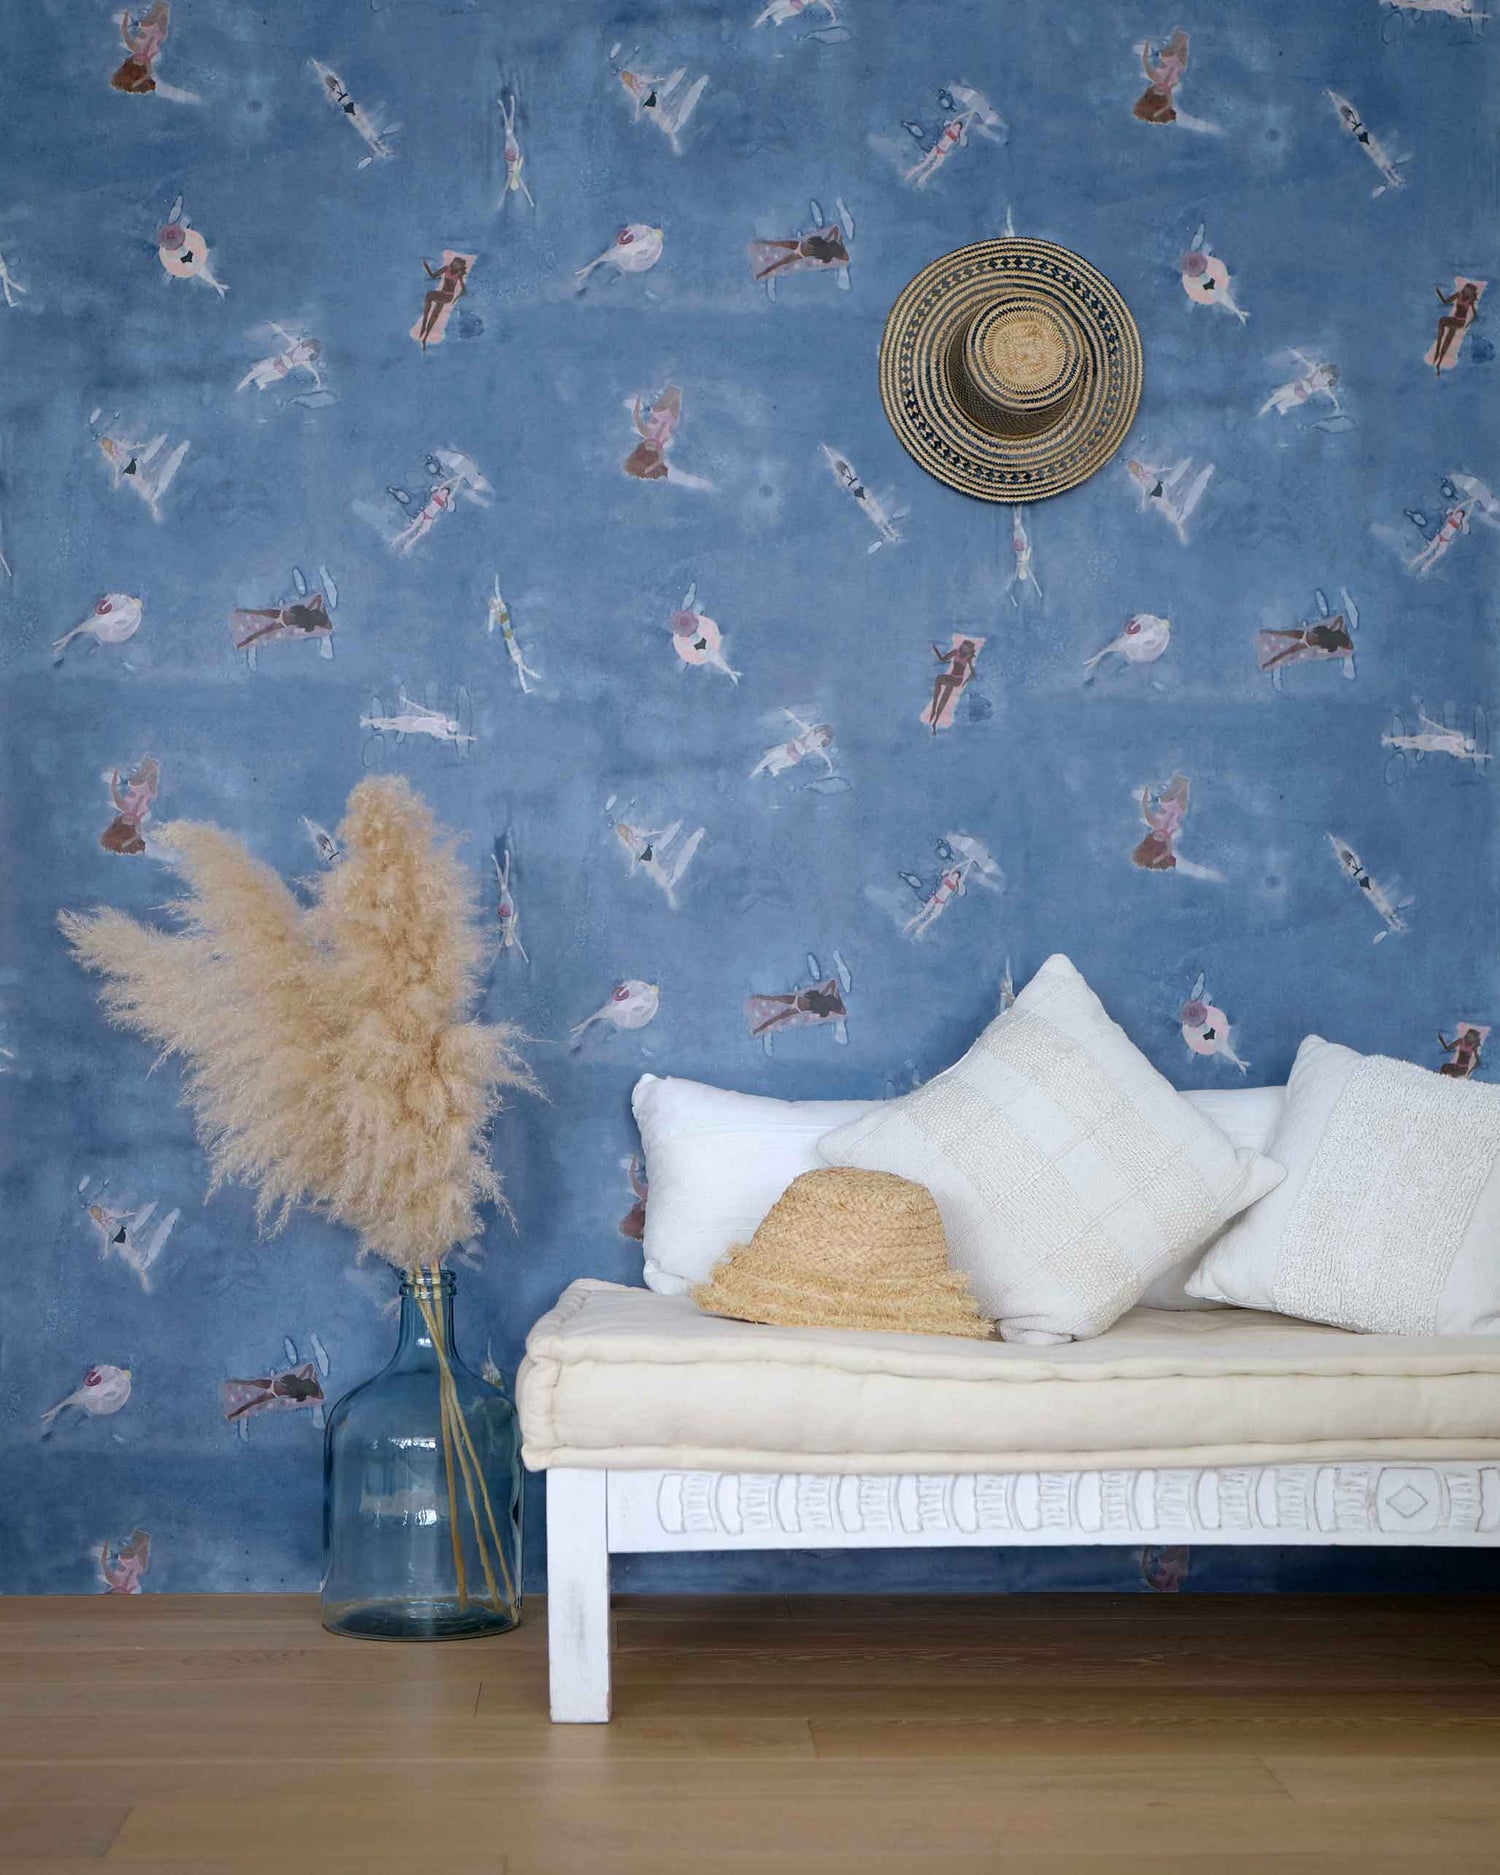 Eskayel's swim lake wallpaper in a navy color installed in a living room.